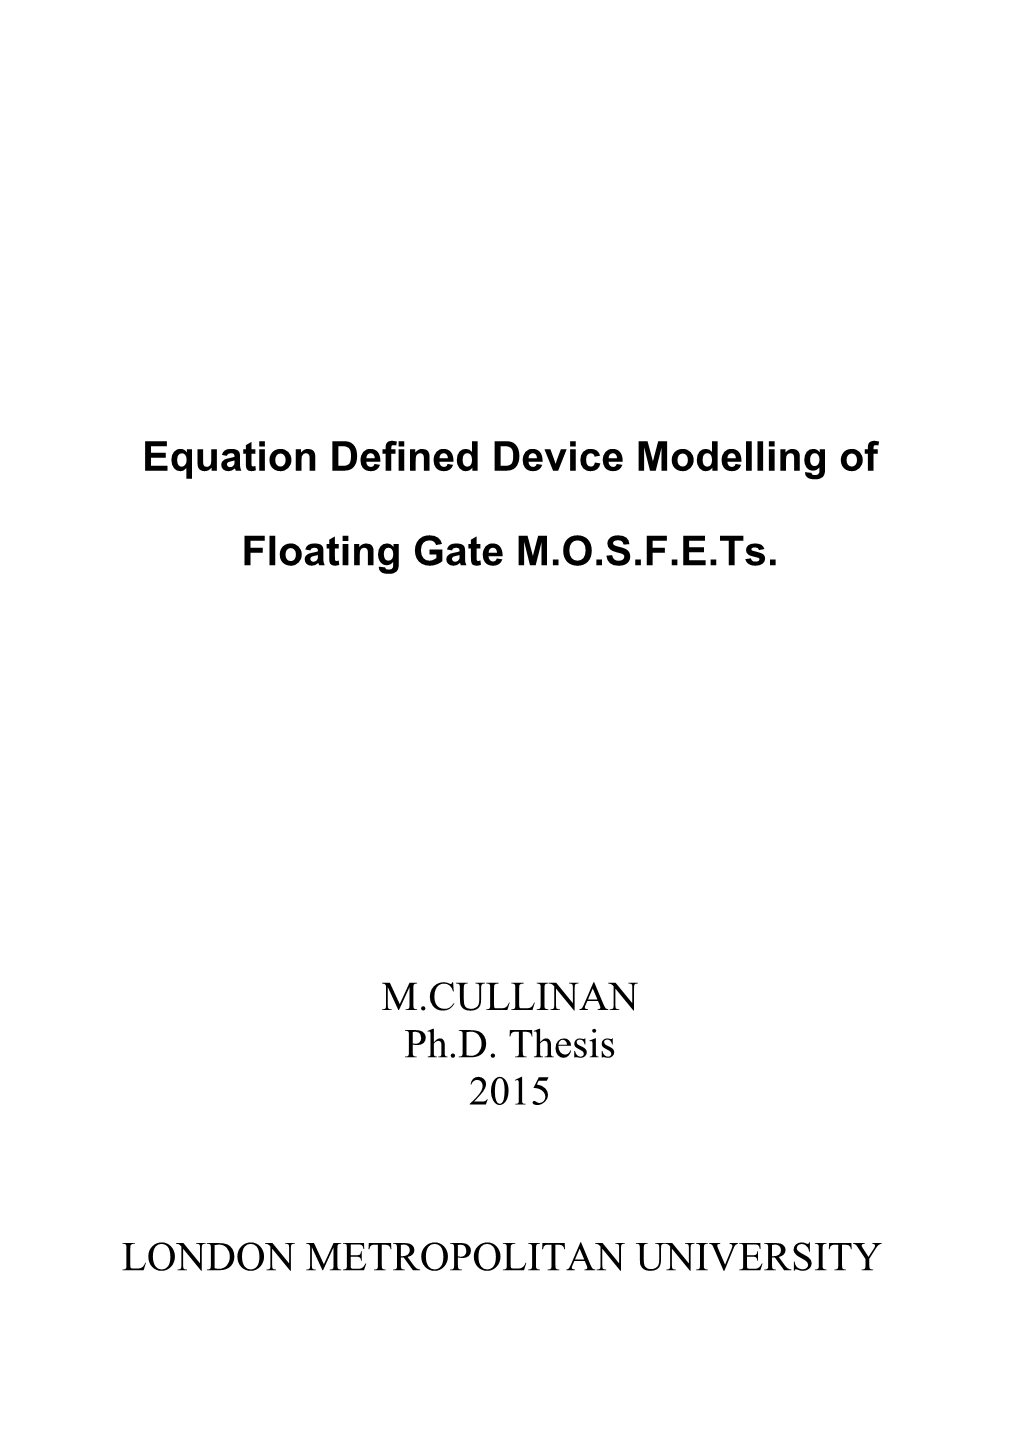 Equation Defined Device Modelling of Floating Gate Mosfets